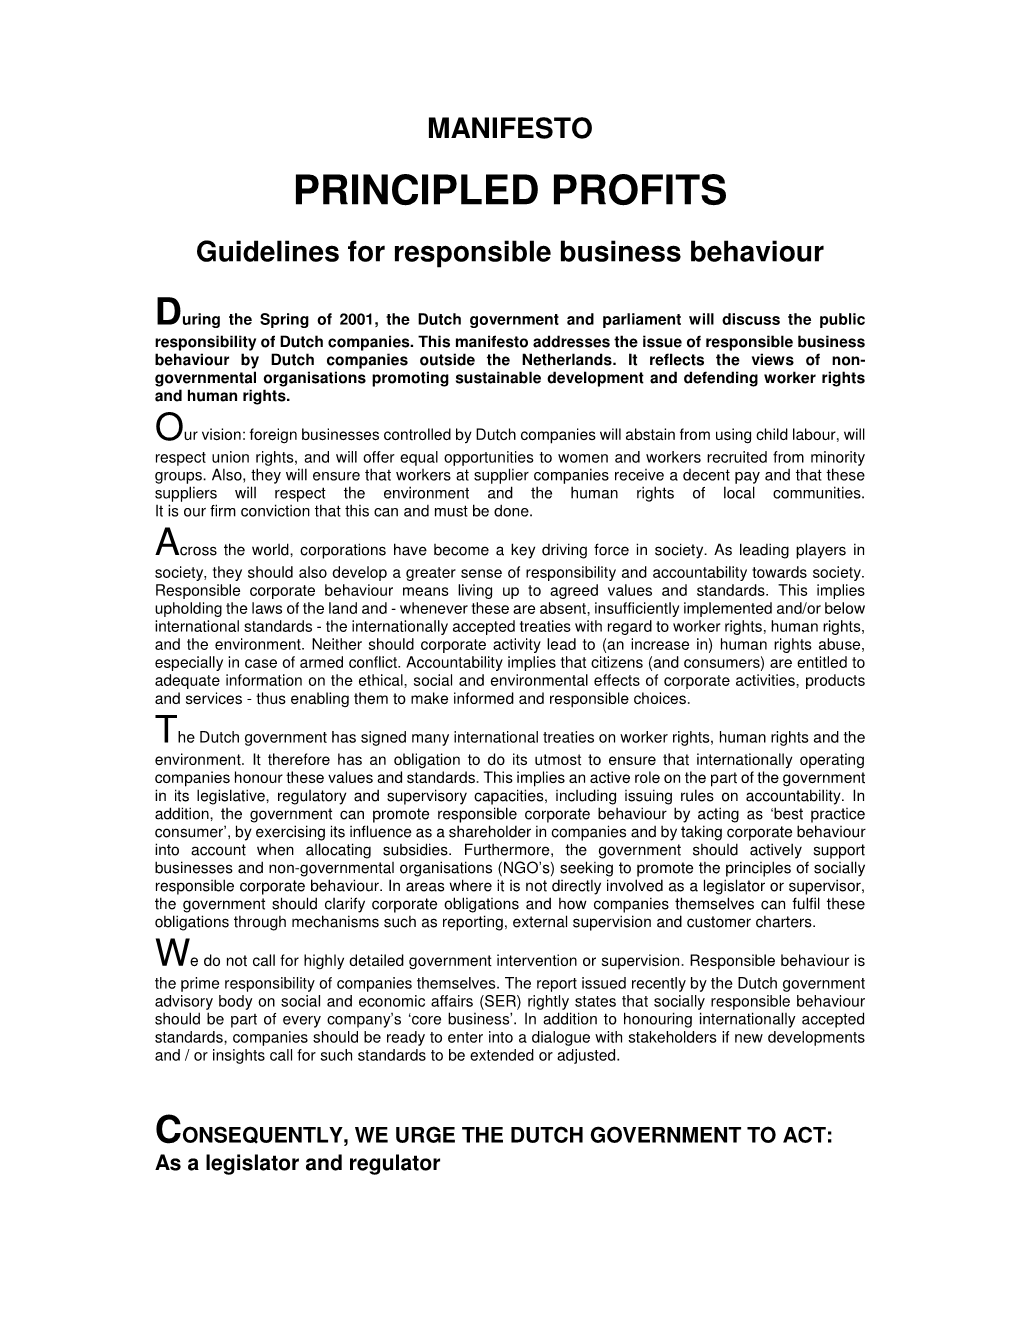 PRINCIPLED PROFITS Guidelines for Responsible Business Behaviour